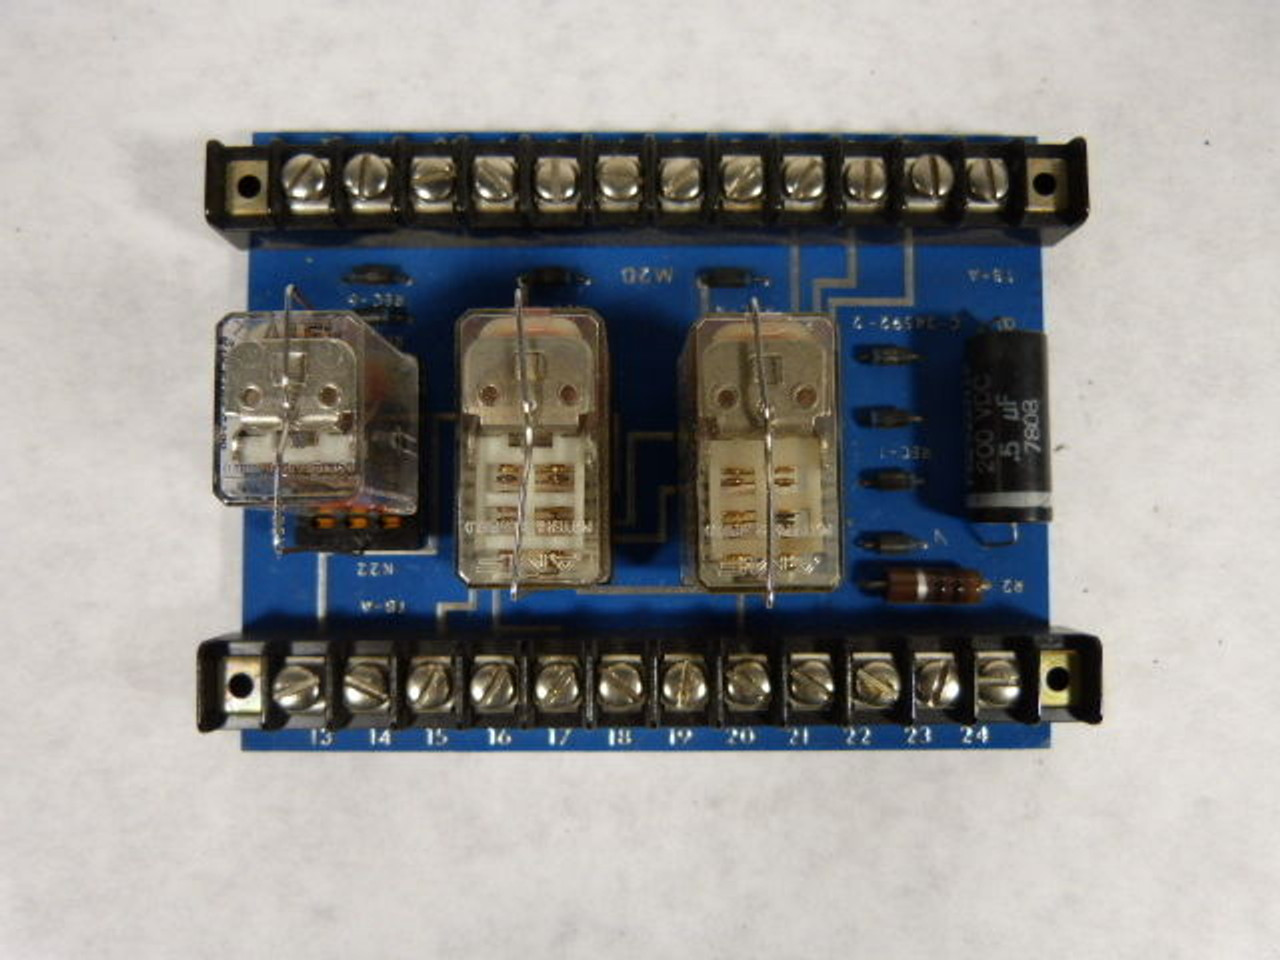 Rockwell - Goss D34591-G PC Board Relay Interface USED